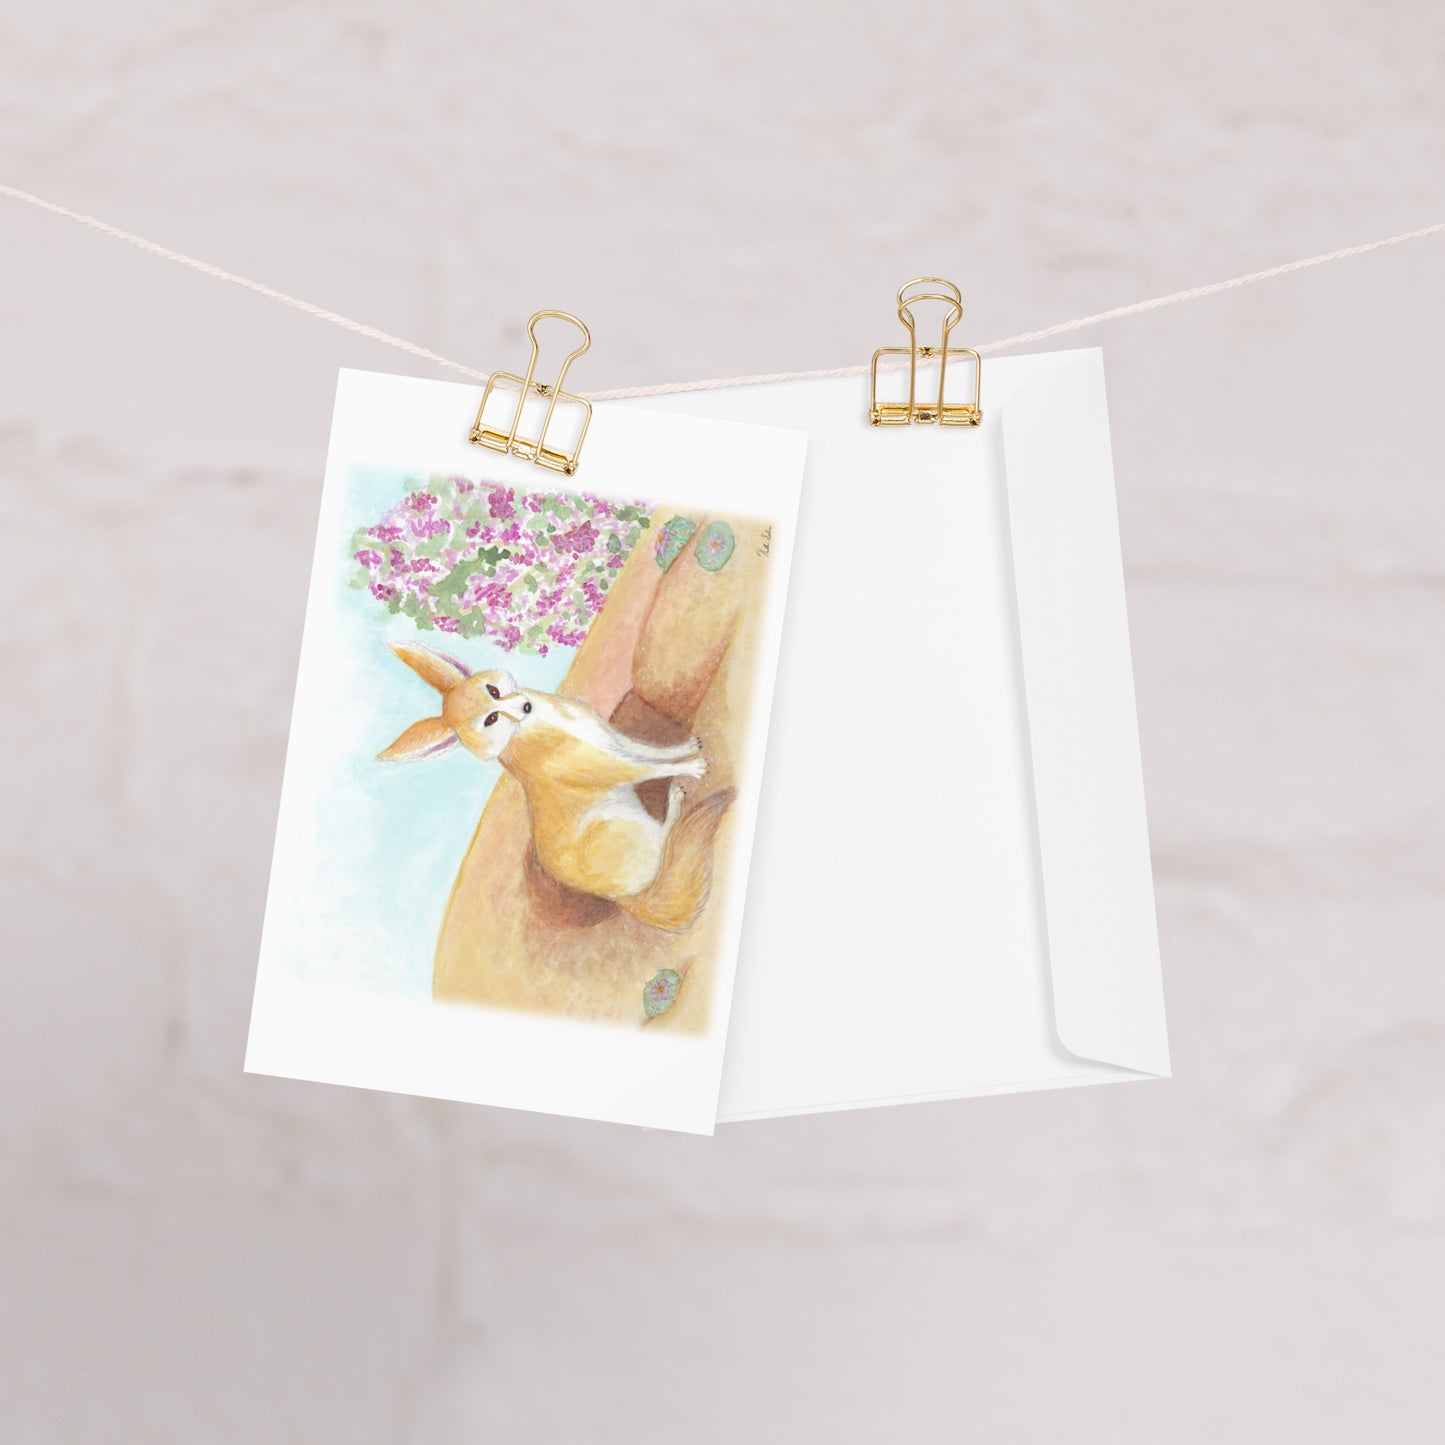 Pack of ten 4 x 6 inch greeting cards. Features watercolor print of fennec fox near it's den in the desert by a jacaranda tree on the front. Inside is blank. Made of coated paperboard. Comes with ten envelopes. One card shown on clothesline with a white envelope.